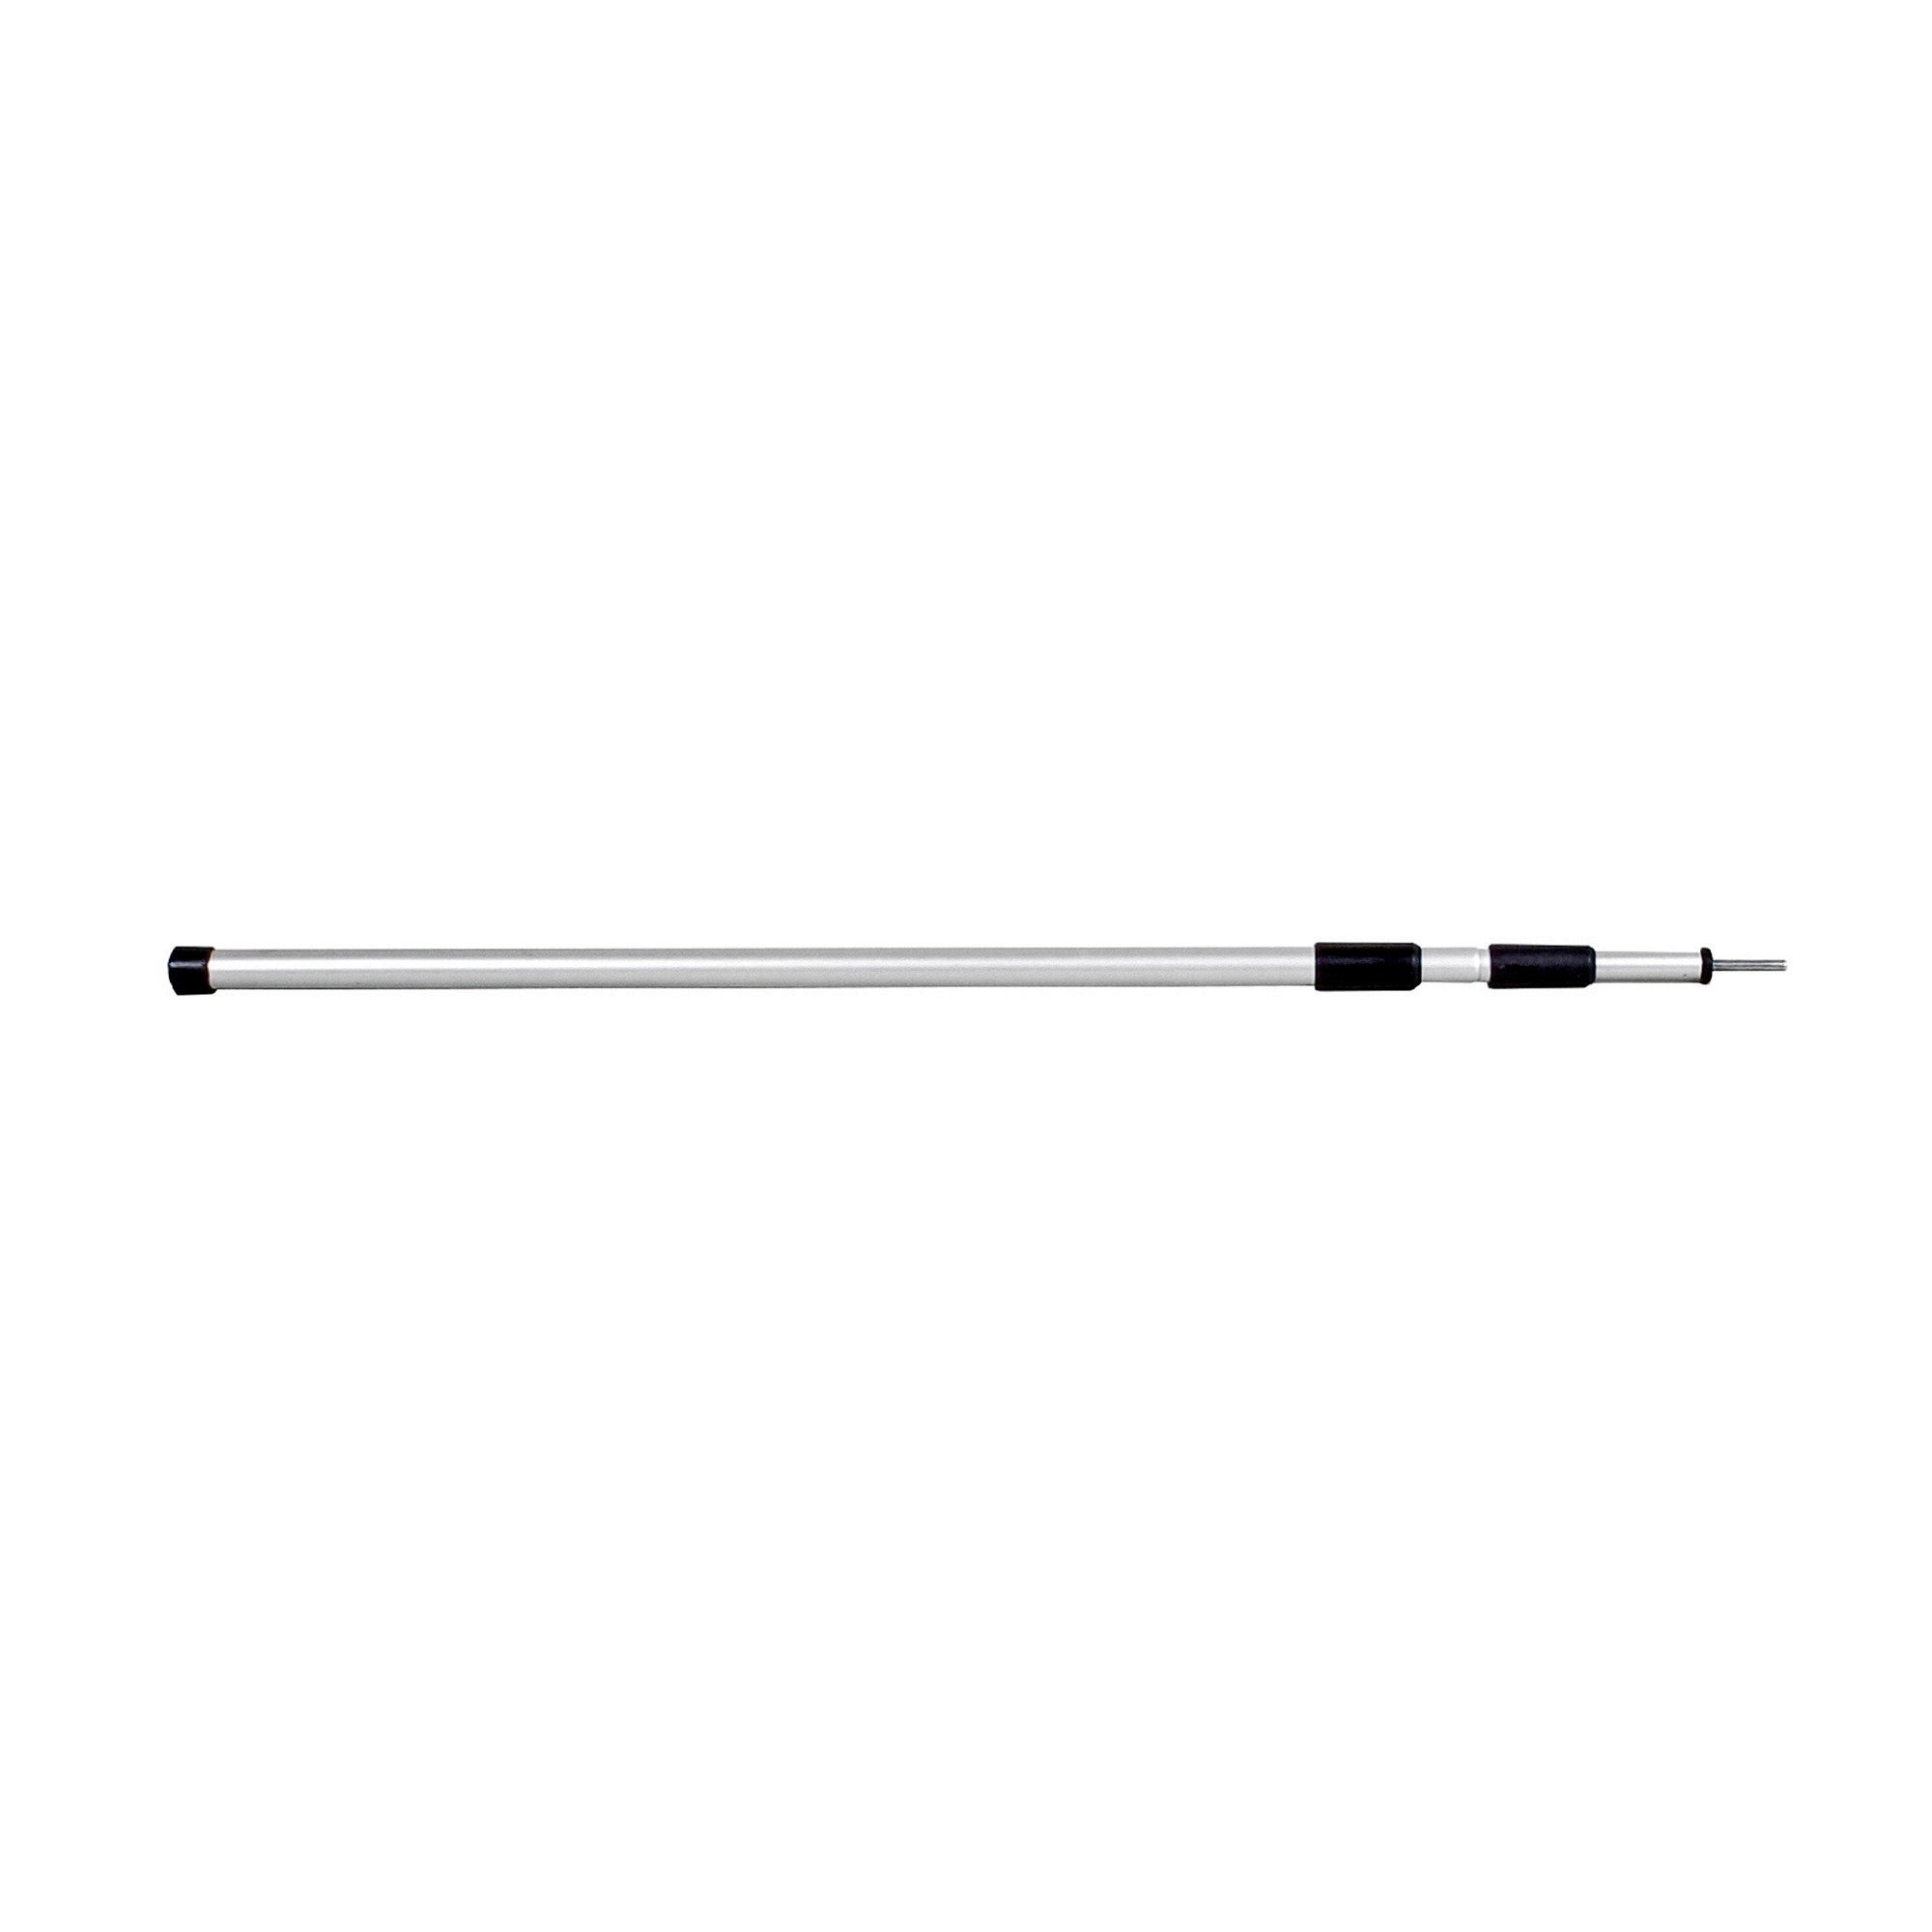 Relags 3-Section Alu Pole Extendable Metal